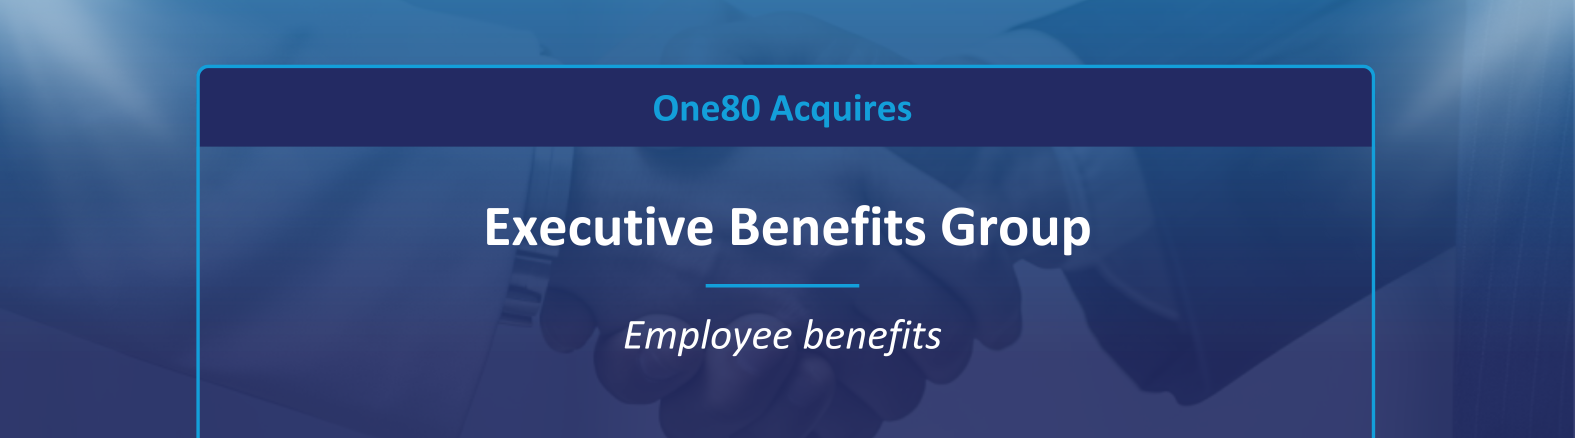 One80 Acquires Executive Benefits Group